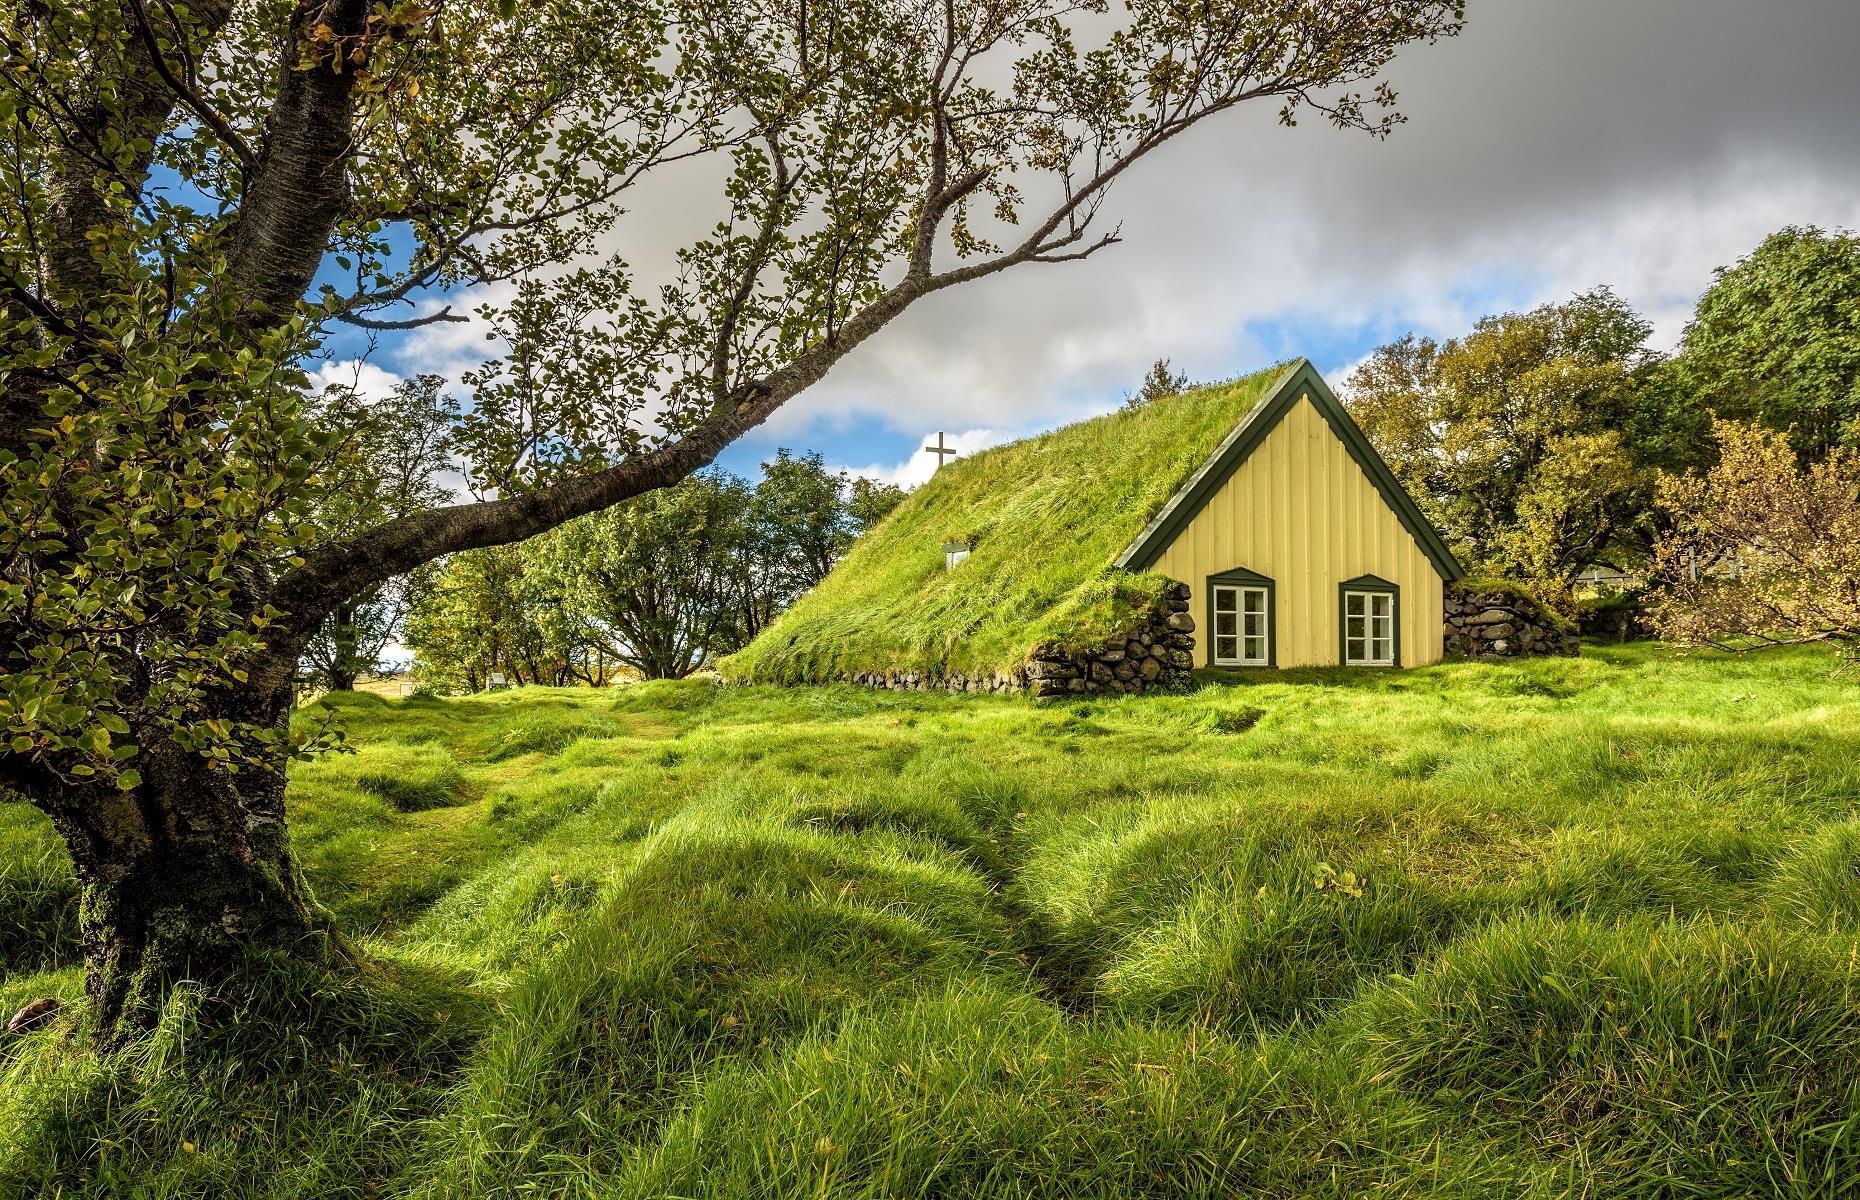 <p>Anyone looking to explore a different side of Iceland should venture to the Skaftafell area of the island. There some truly unique pieces of architecture can be witnessed, including one of the few remaining turf churches. Hofskirkja is embedded in the ground and covered by a vibrant green blanket of grass. Around it sit ancient burial mounds, that are reminiscent of the lava fields found across the country. Dating back to 1884, it was capped by turf to stop the heat escaping in the depths of winter.</p>